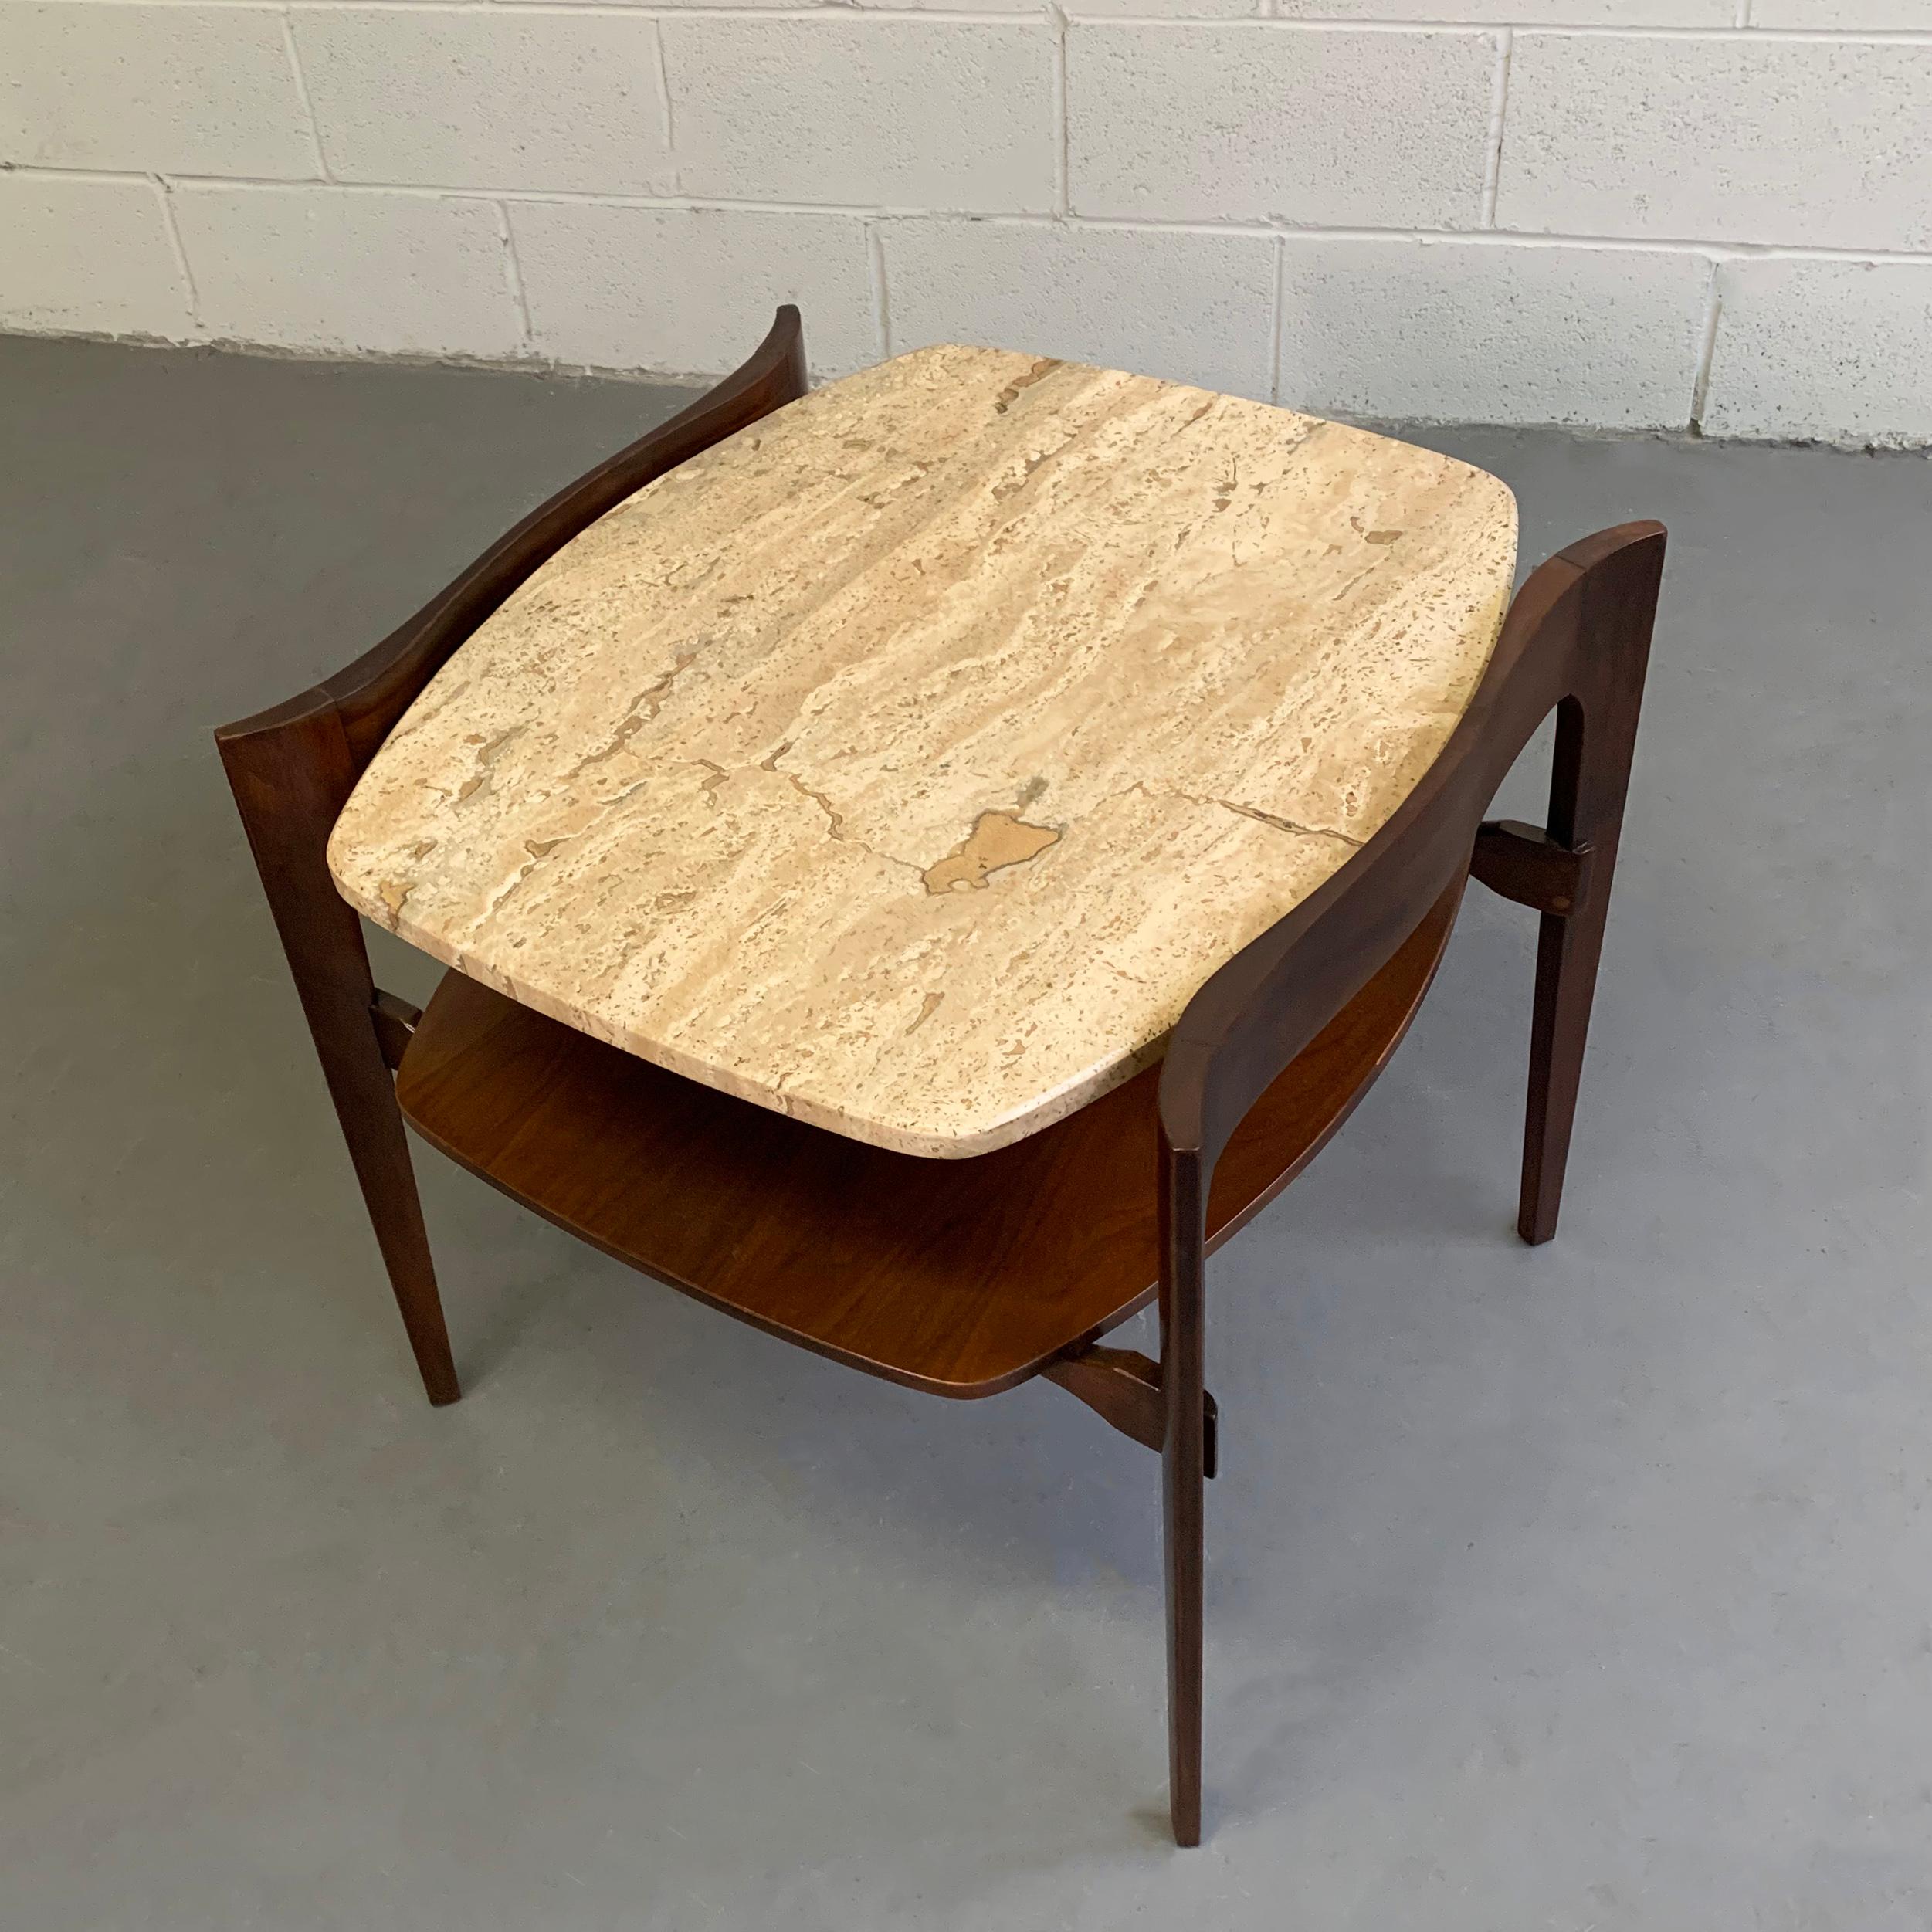 Travertine and Walnut Side Table by Bertha Schaefer 1